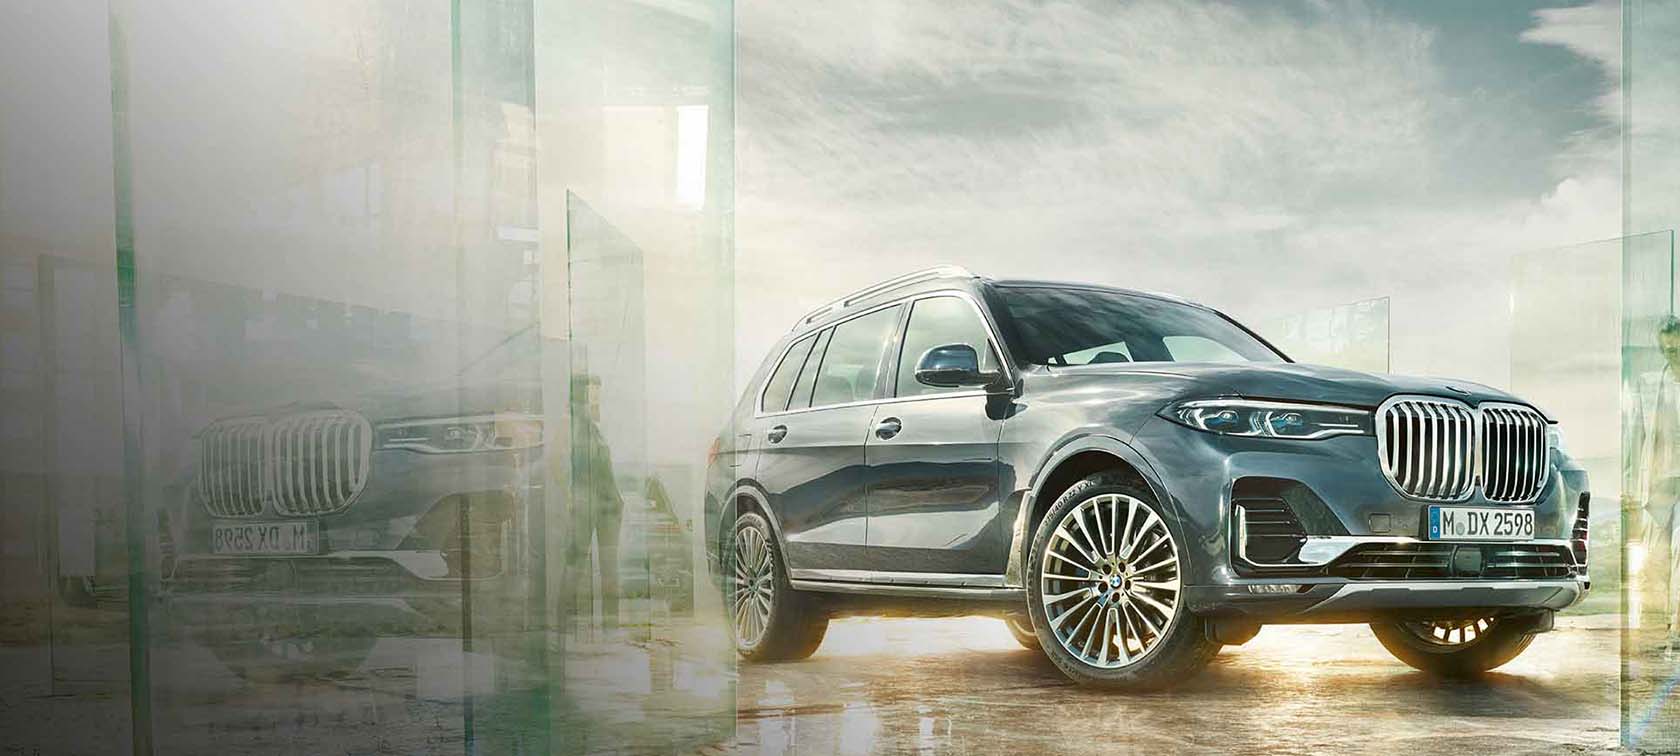 THE FIRST-EVER BMW X7